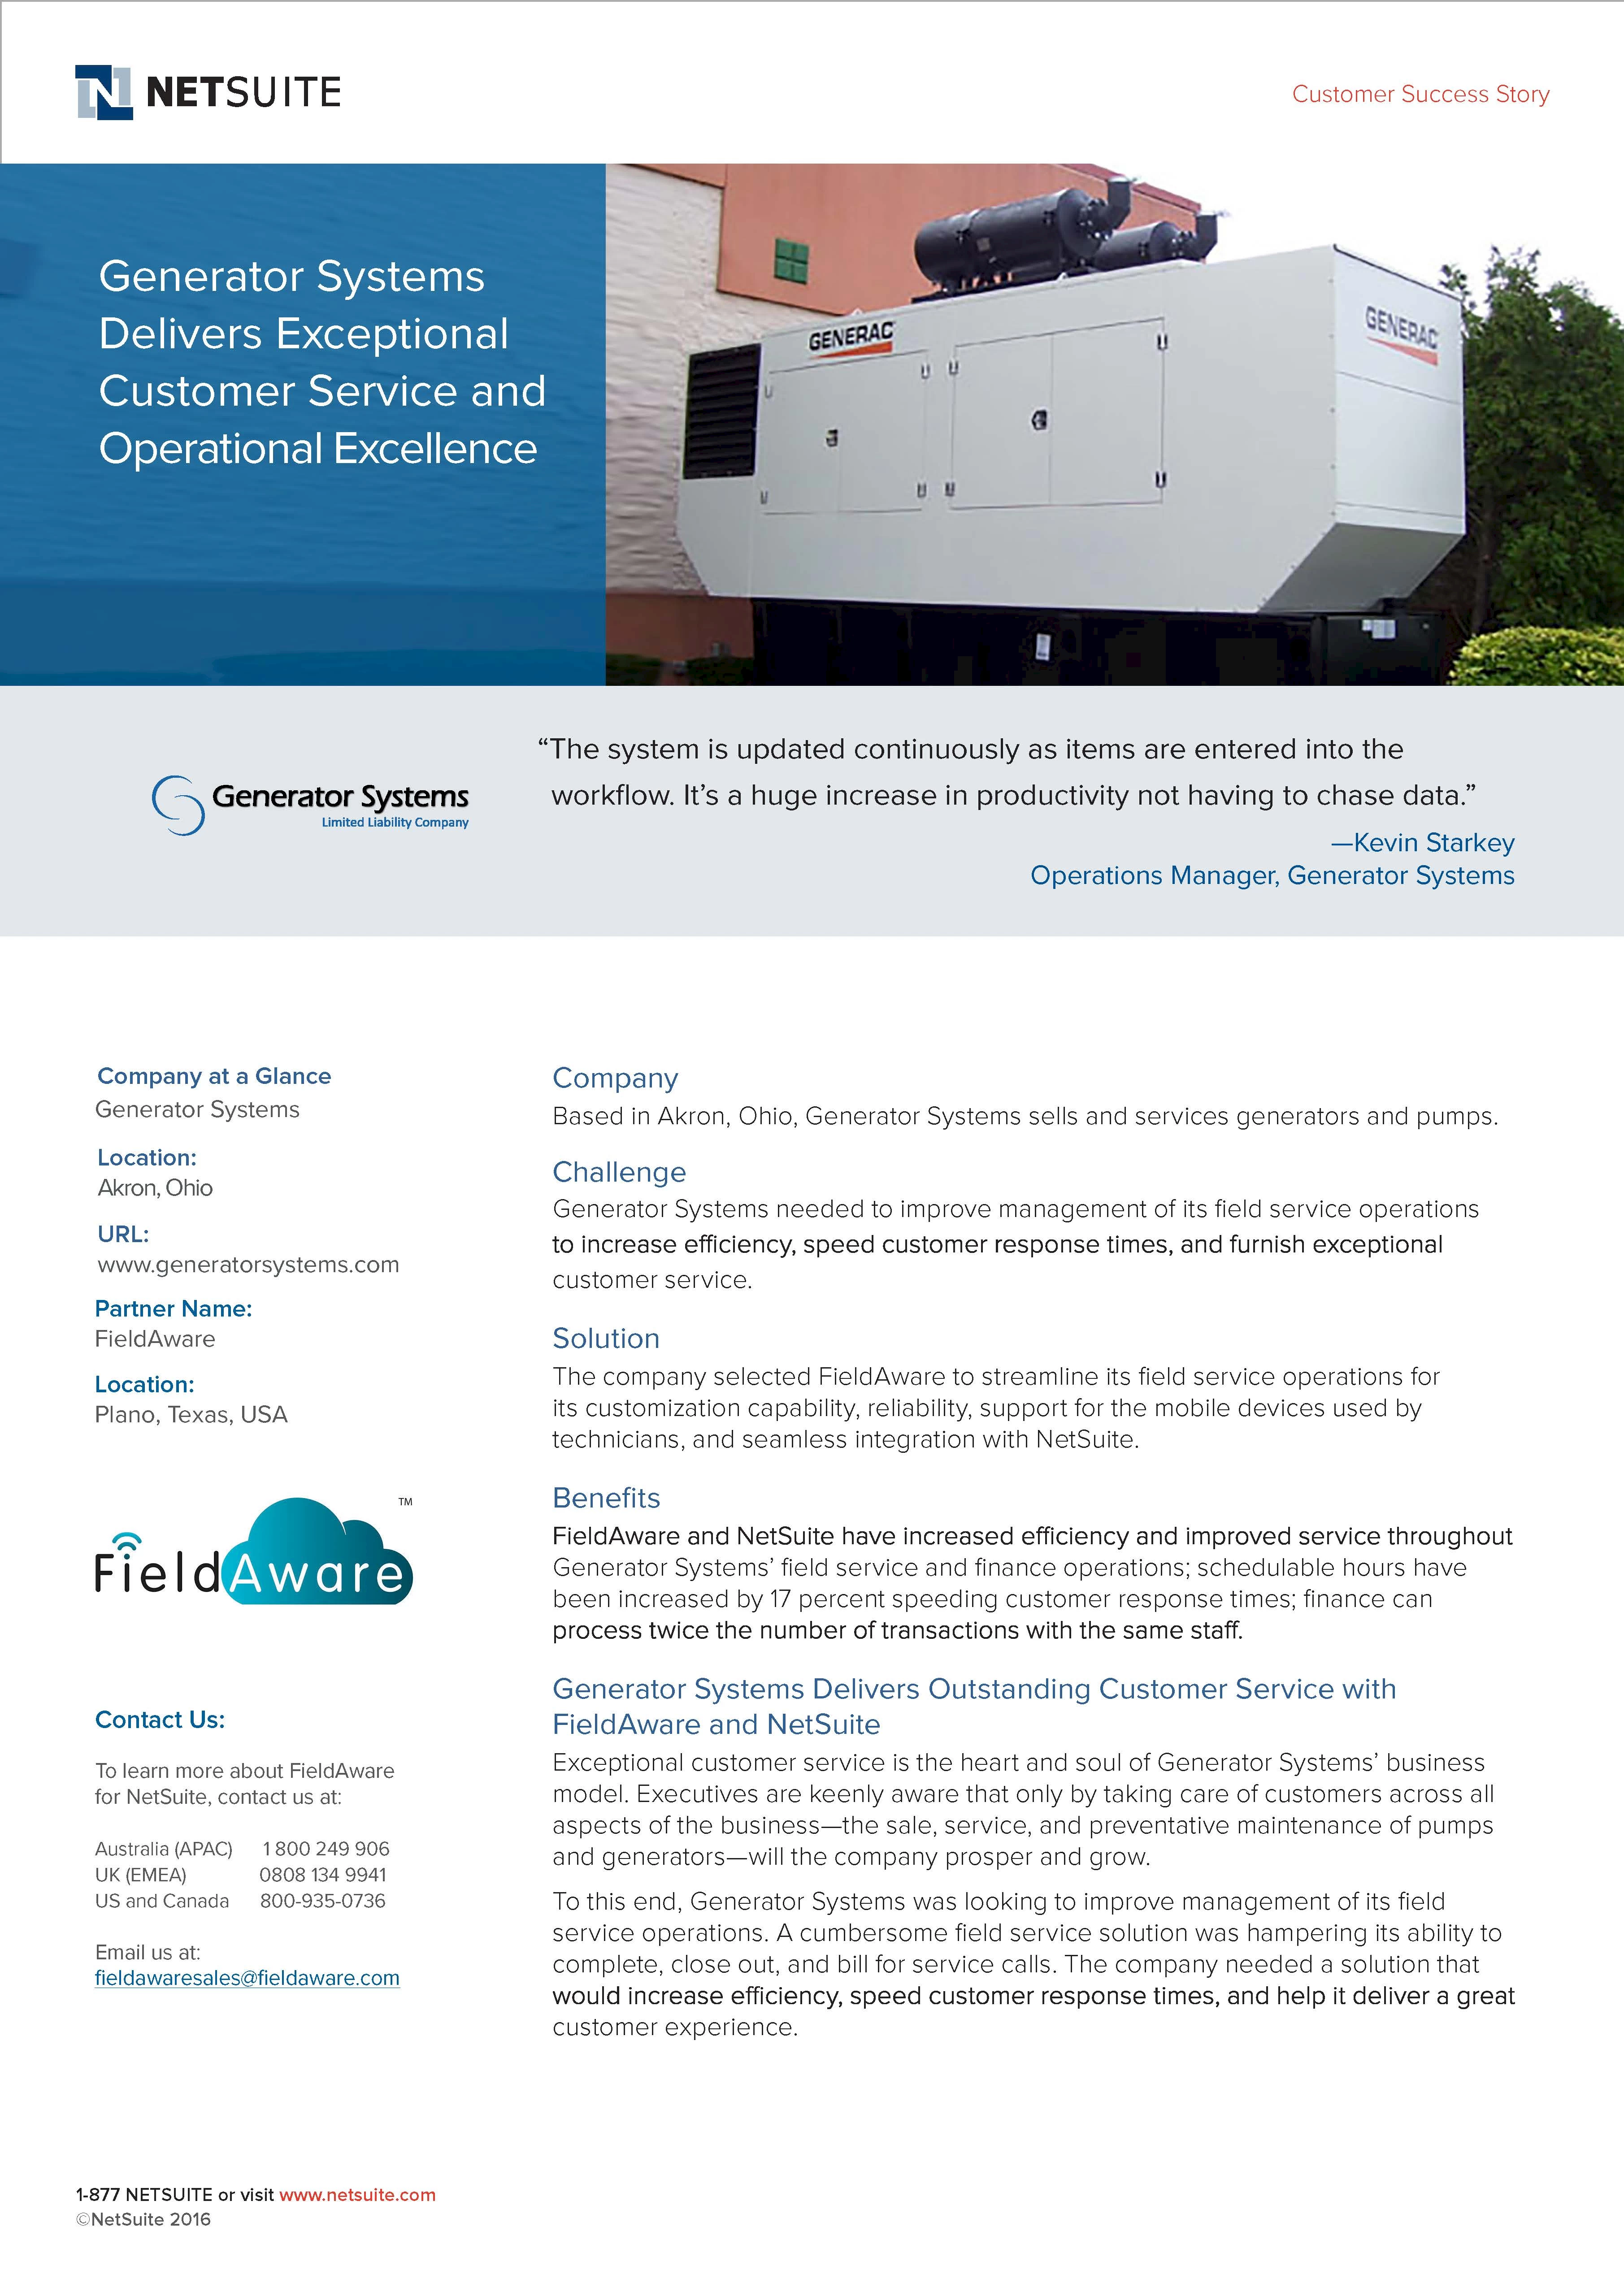 Generator Systems case study